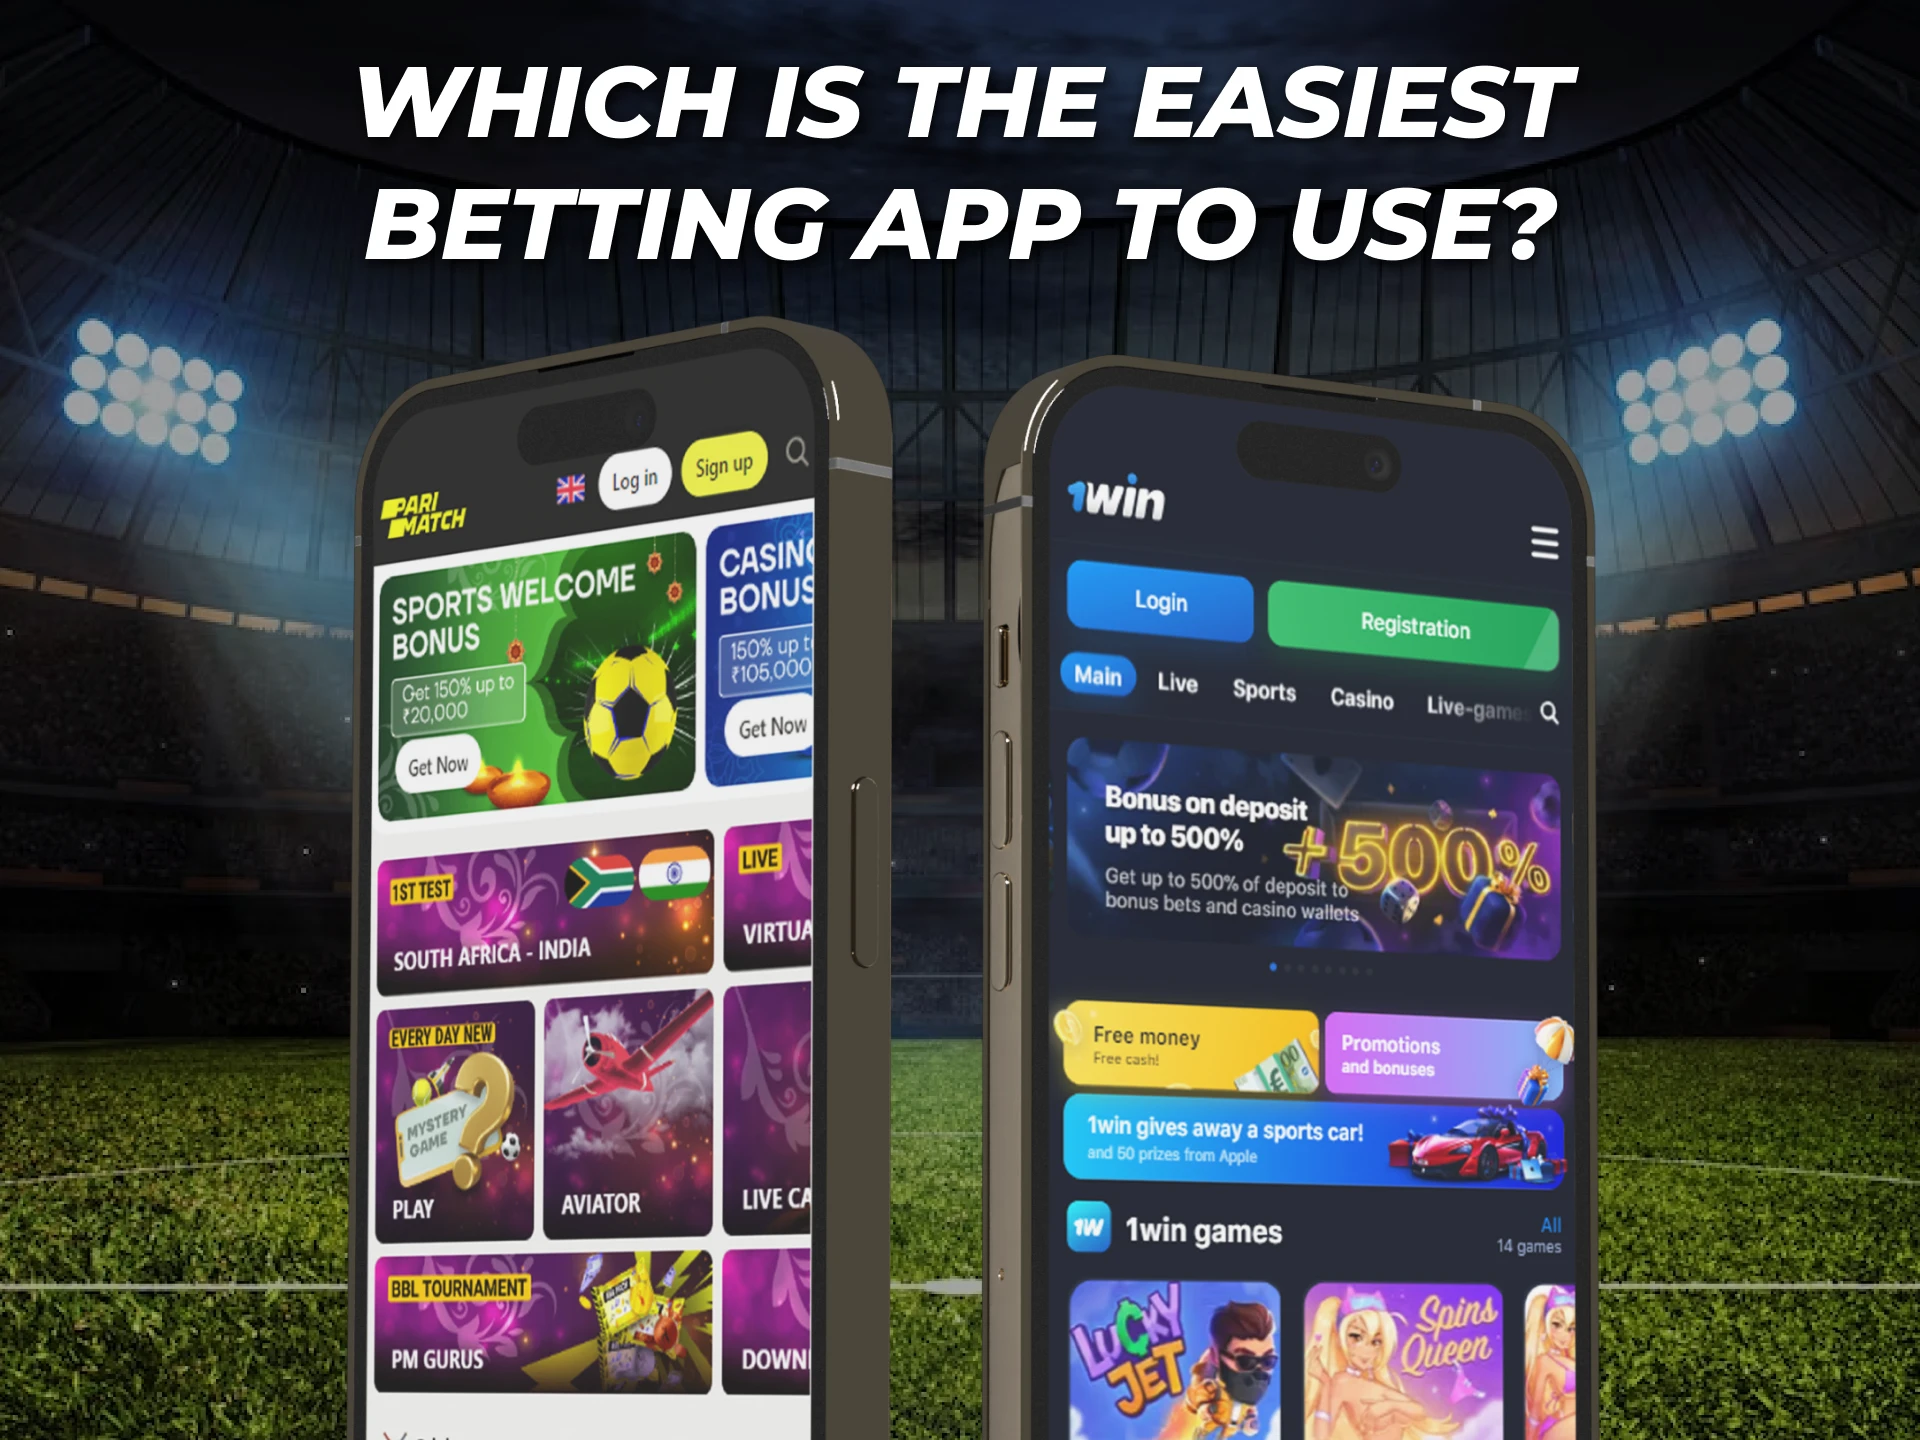 These criteria will help you choose the easiest betting app to use.